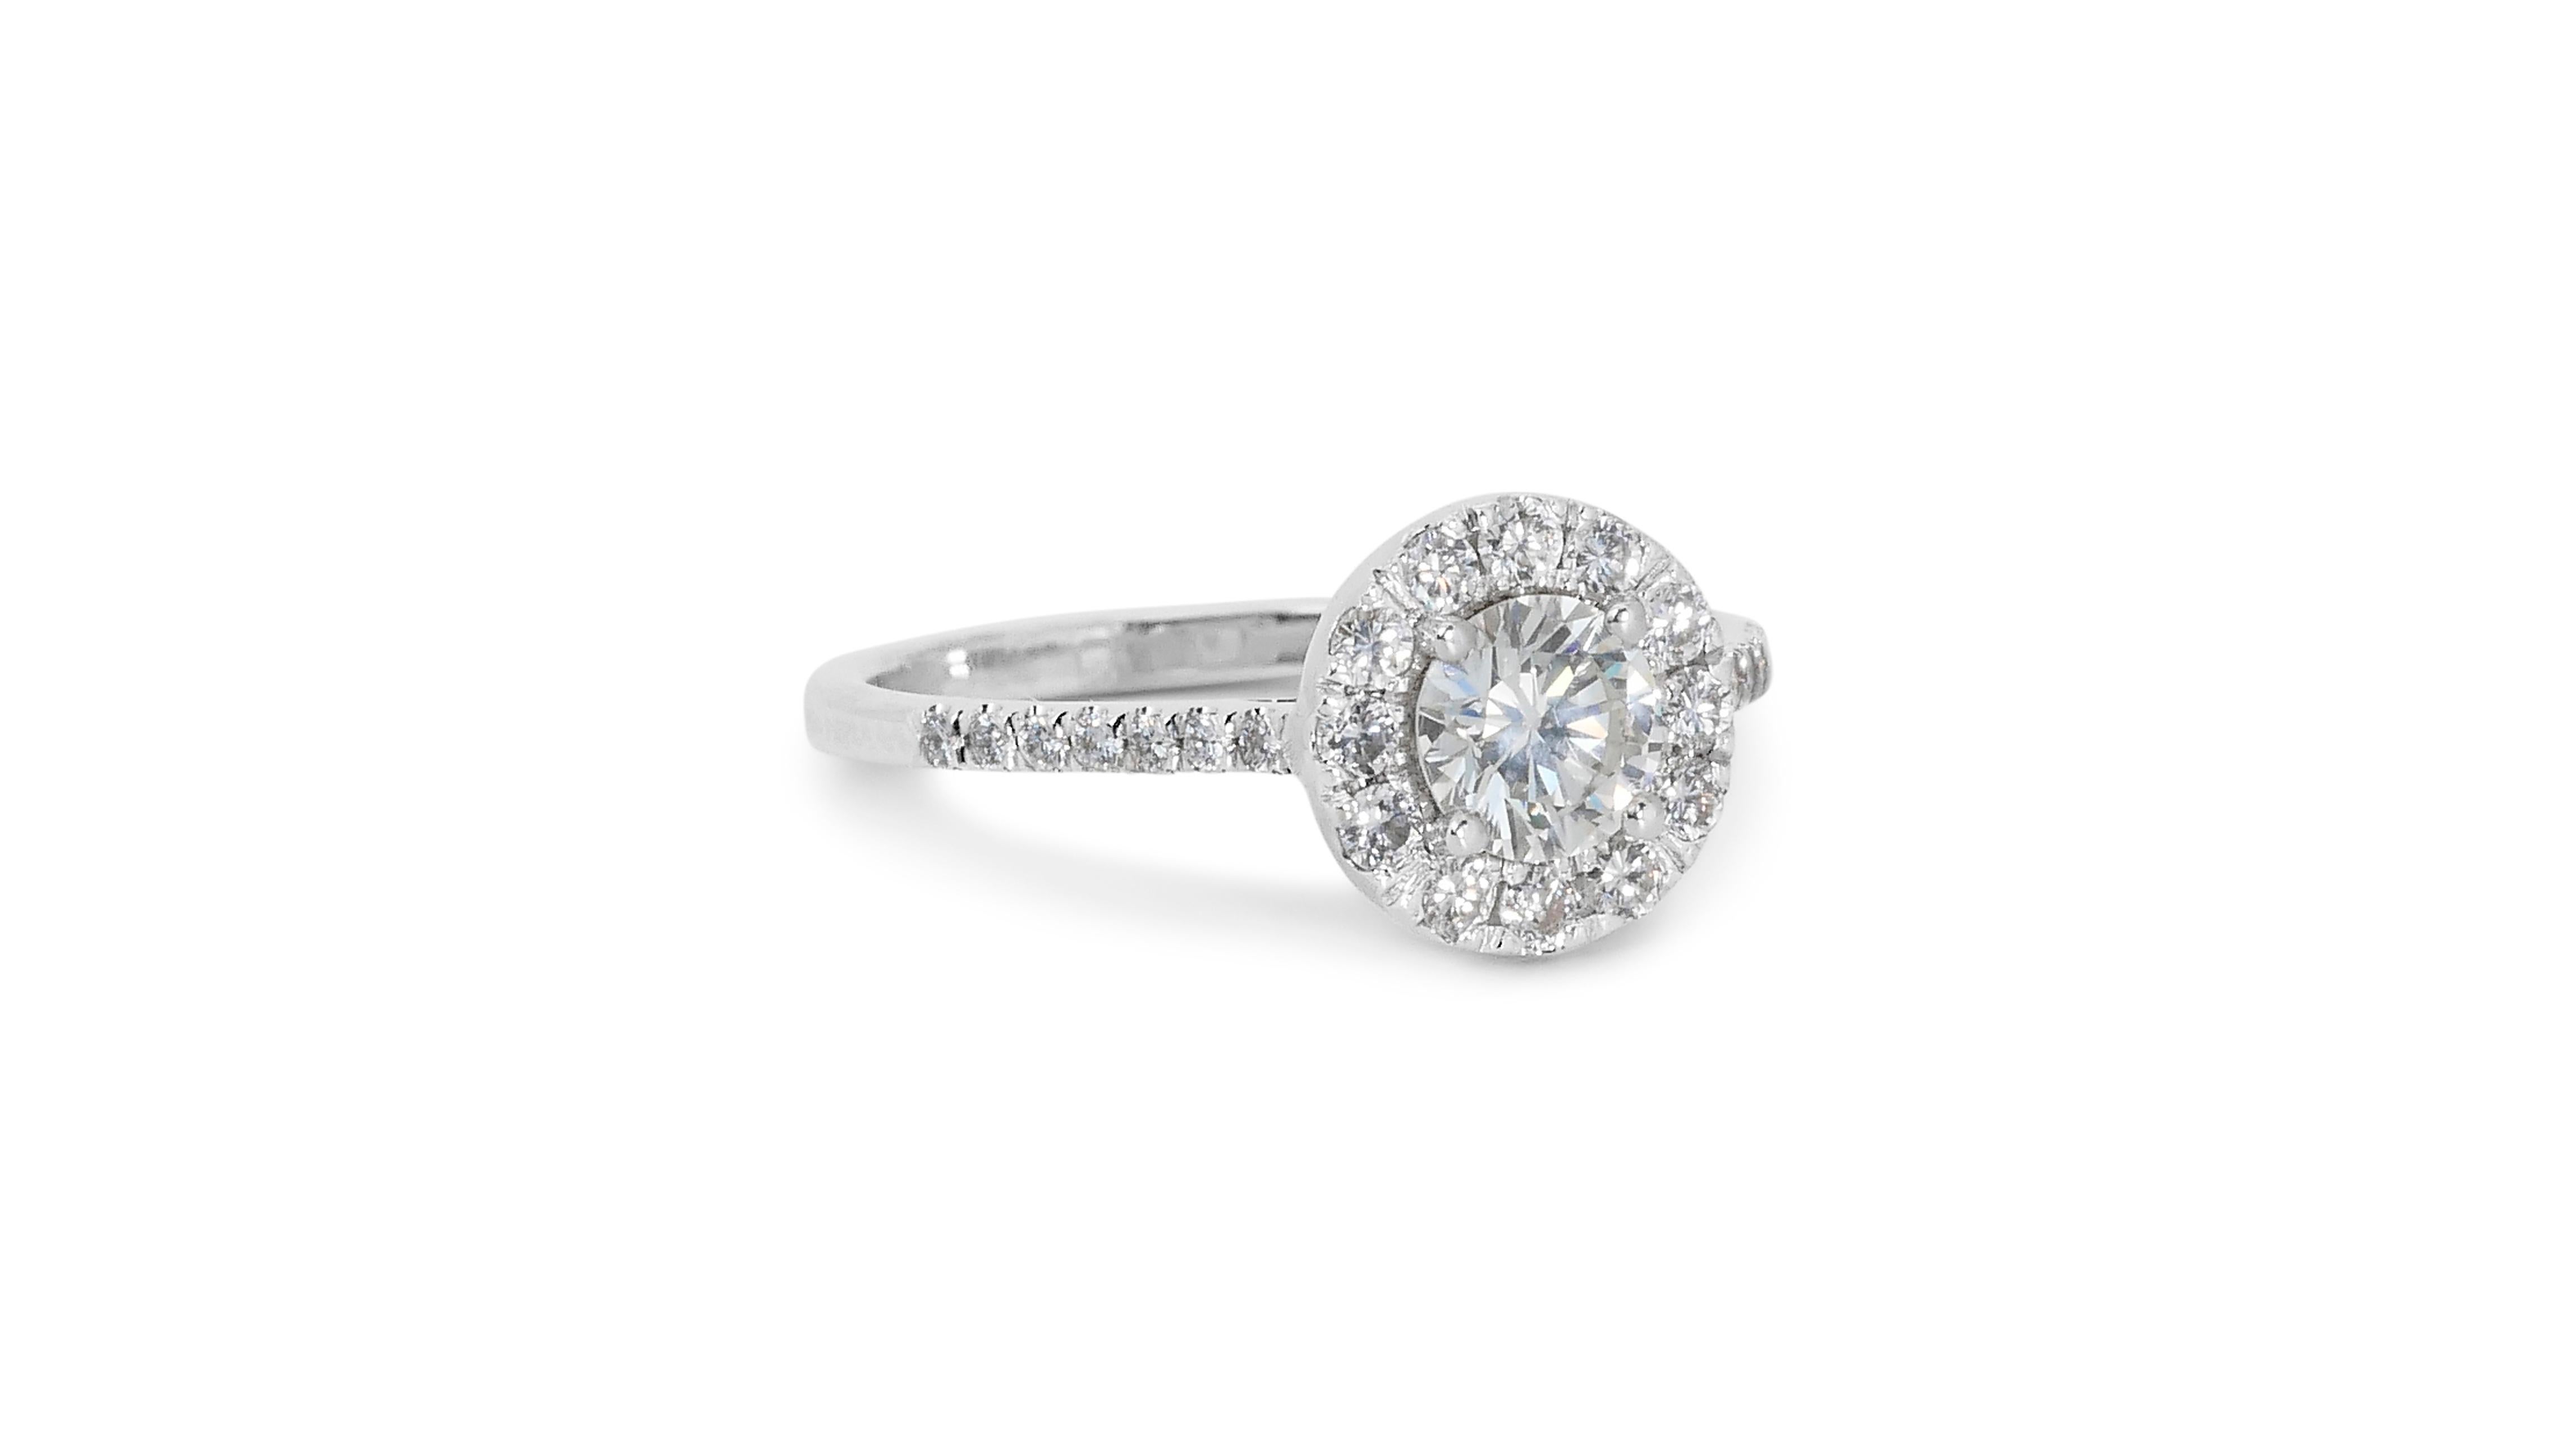 Stunning 1.35ct Diamond Halo Ring in 18k White Gold - GIA Certified For Sale 1